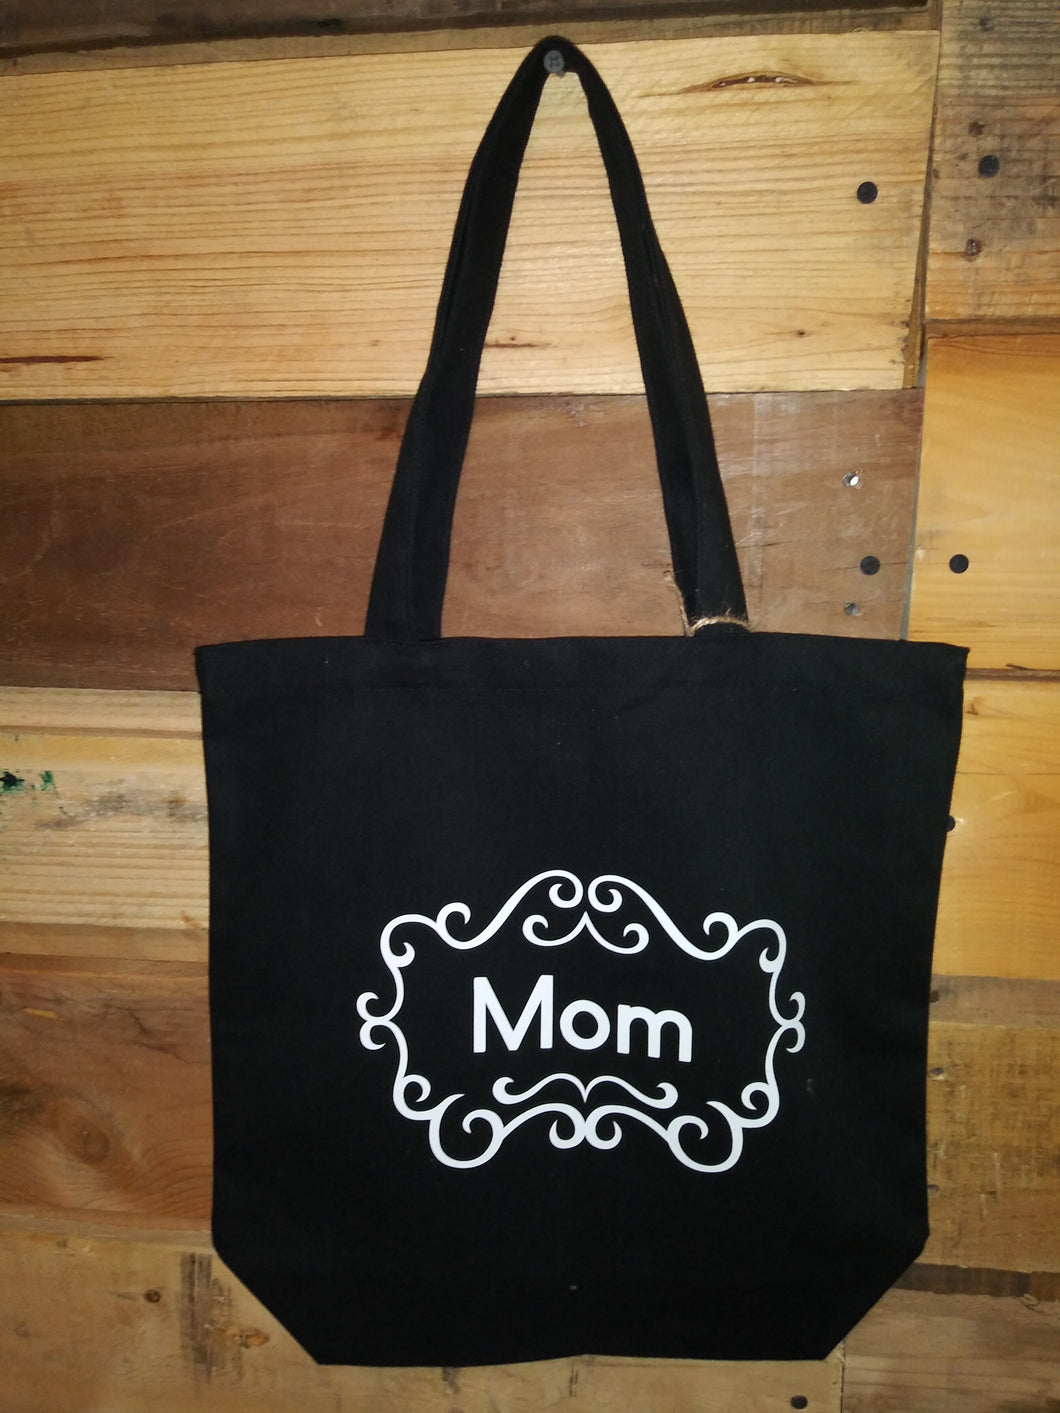 Tote Bags With Sayings Black Mom